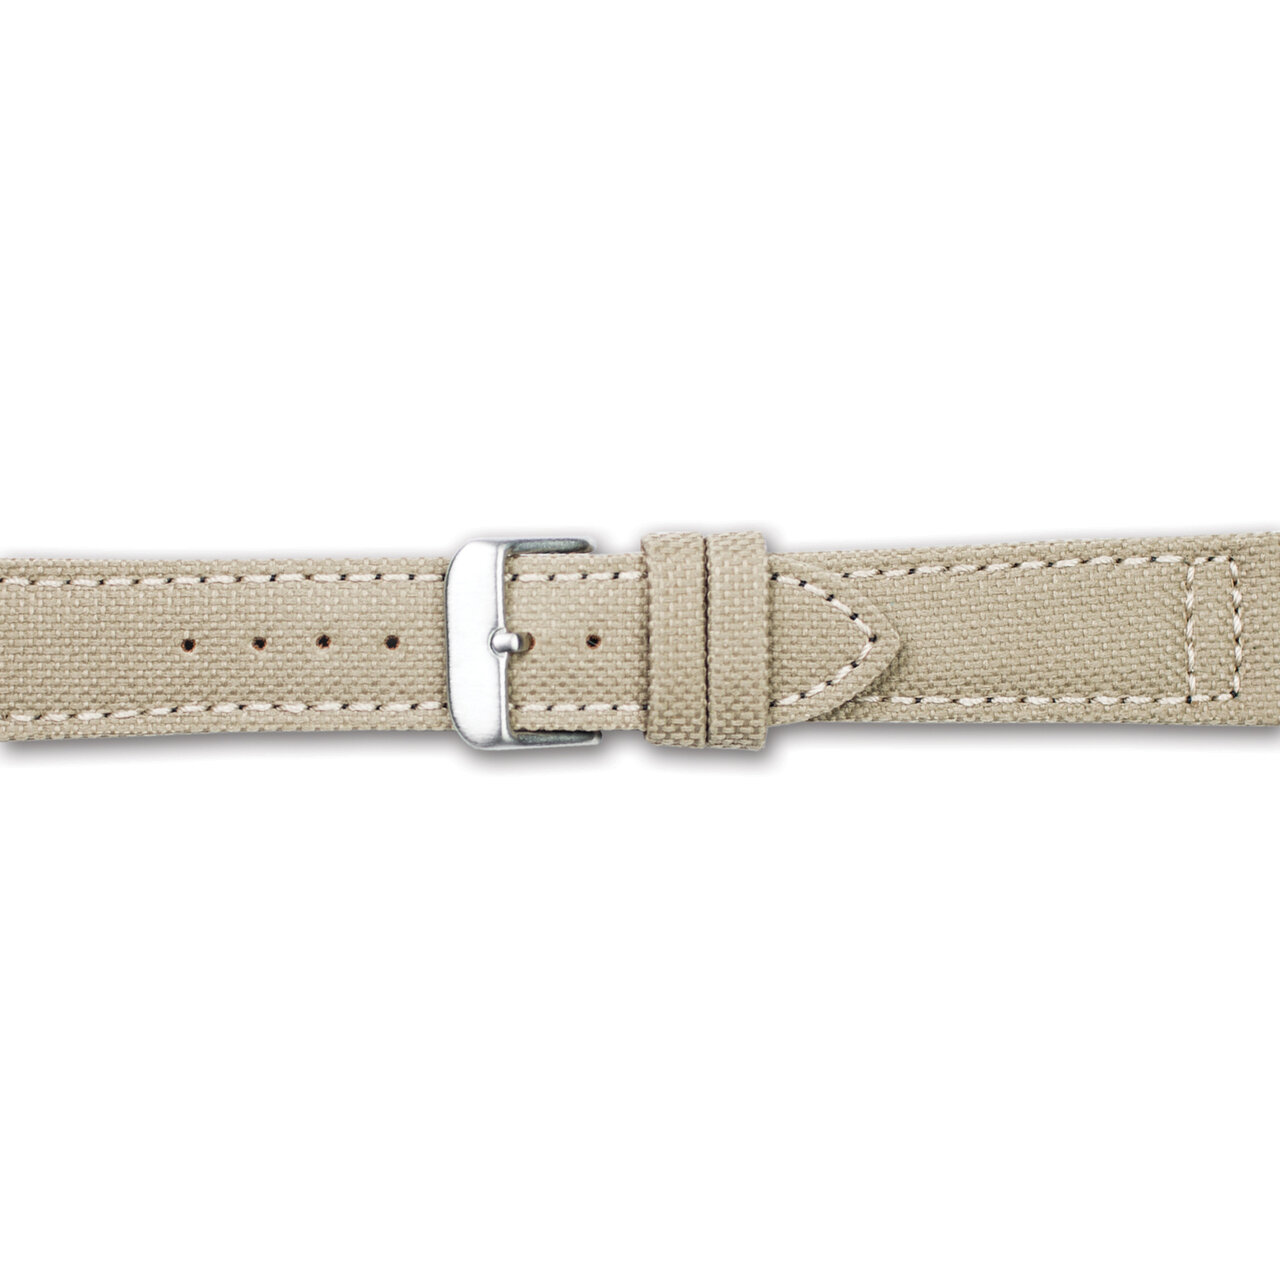 24mm Tan Canvas Leather Lining Silver-tone Buckle Watch Band BAW388-24